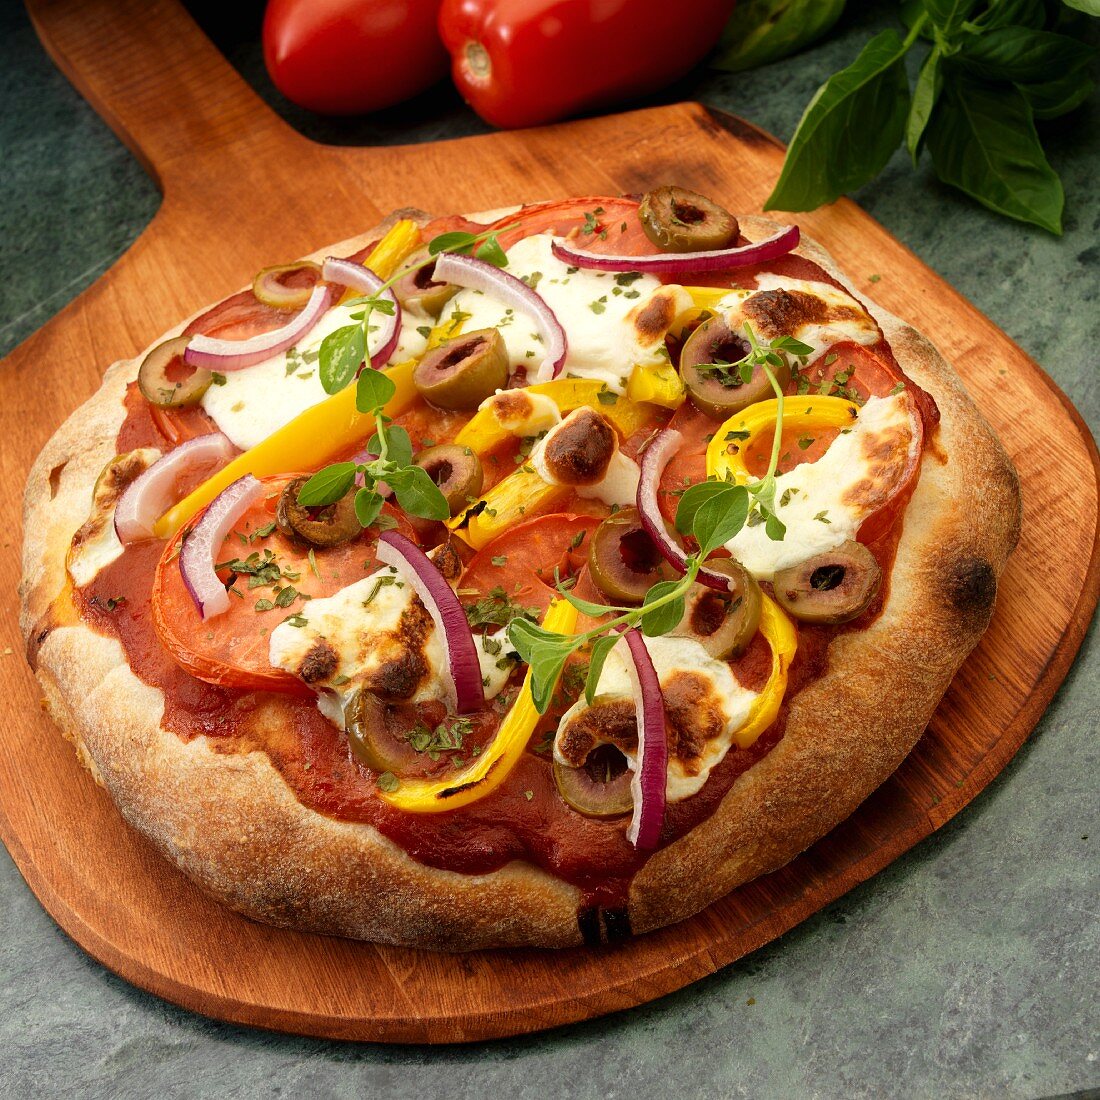 Rustic vegetarian Pizza with tomatoes, olives, yellow peppers, red onion, mozzarella